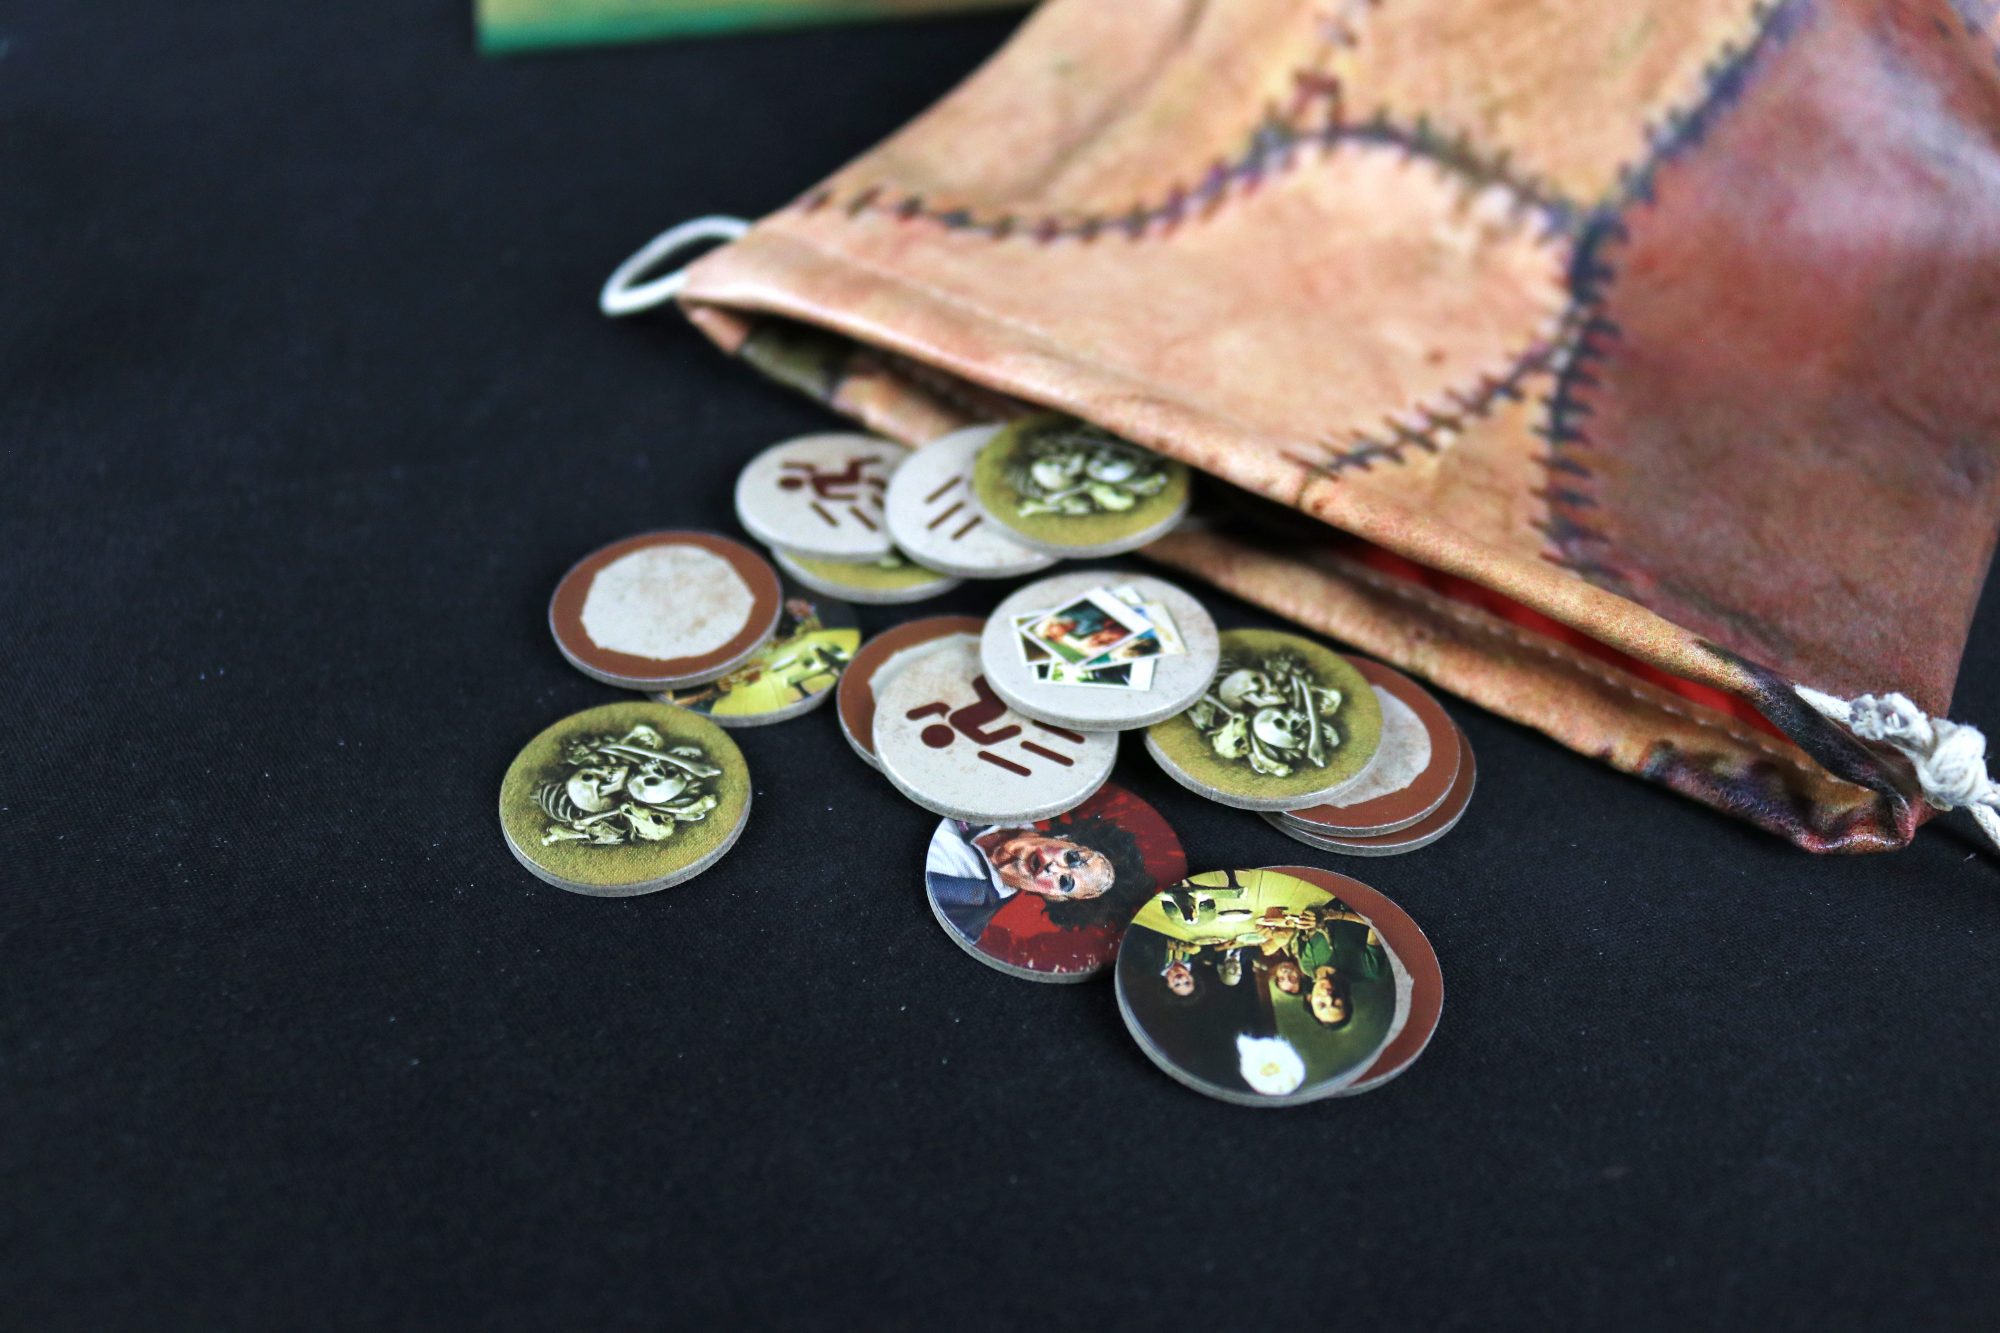 The Texas Chainsaw Massacre Board Game - scavenge tokens 